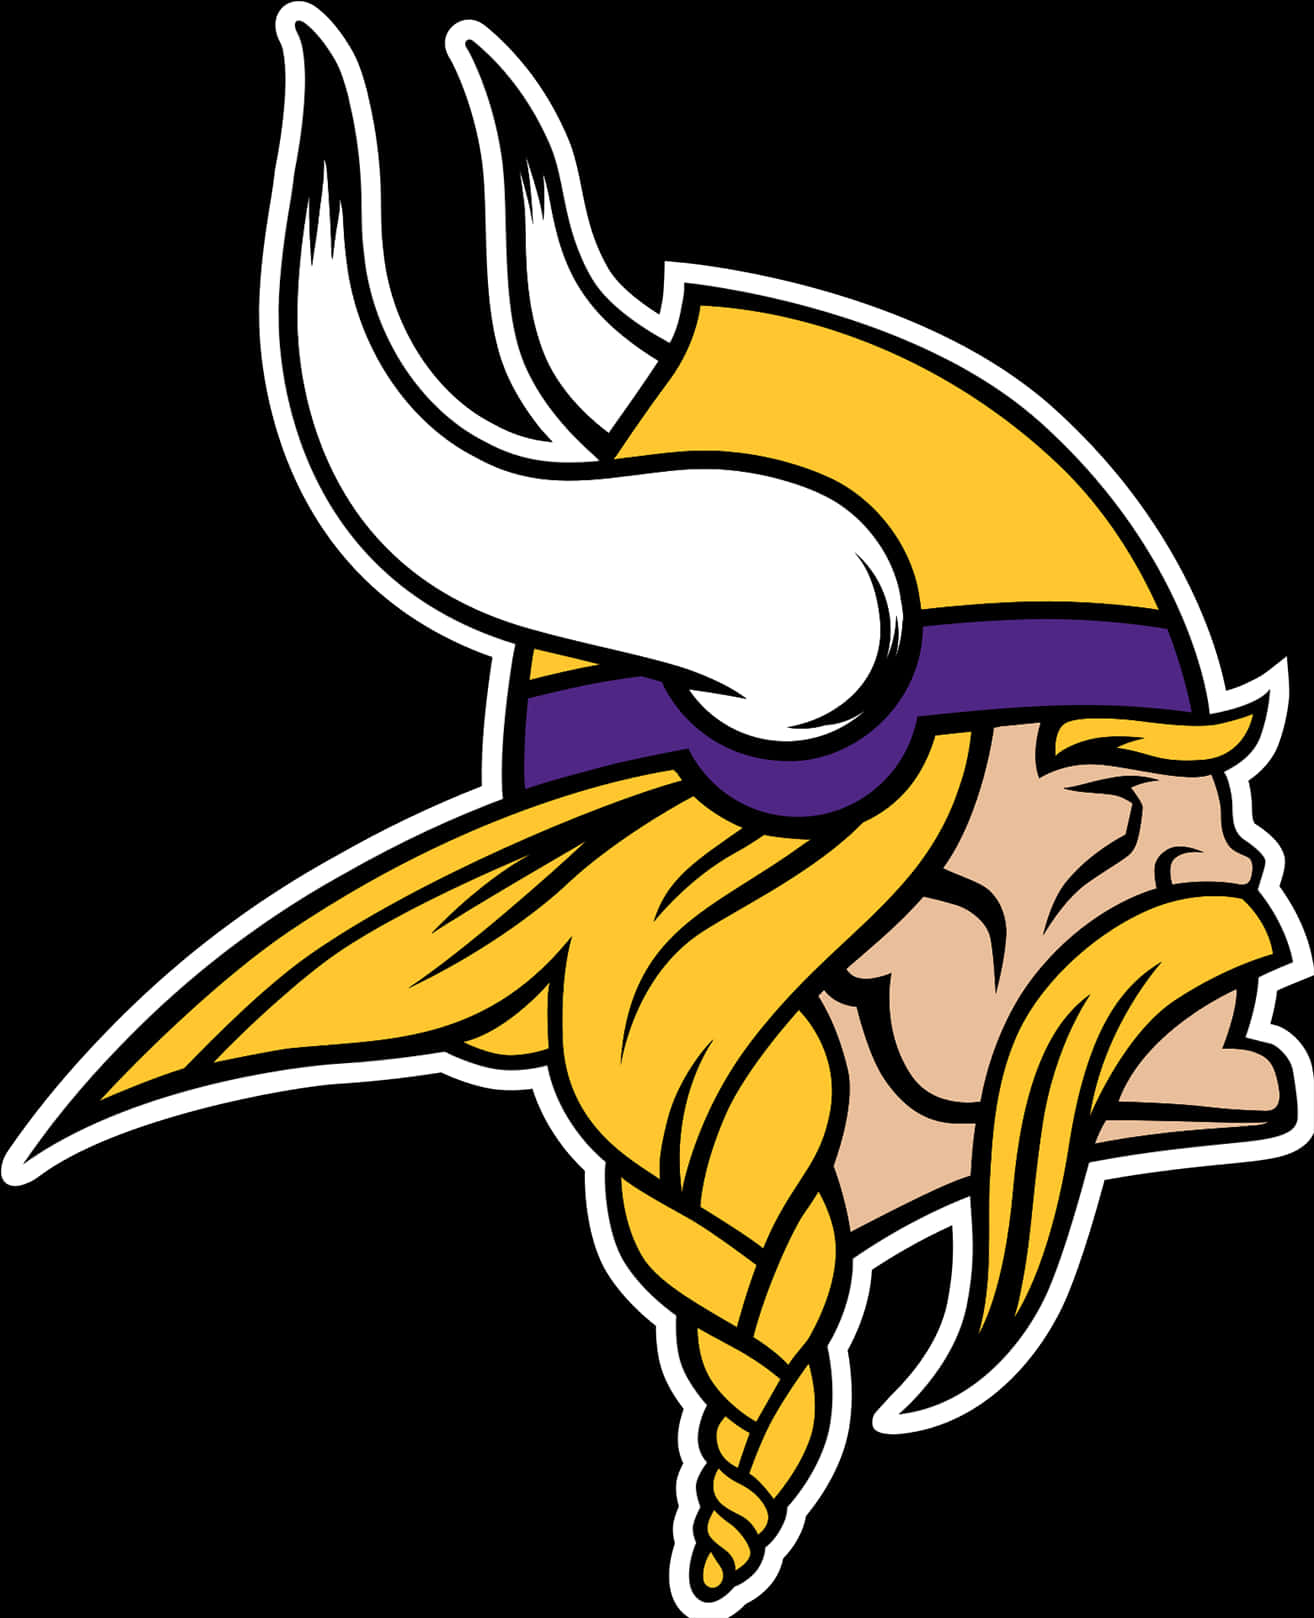 A Cartoon Of A Viking With A Braided Hair And A Purple And White Helmet